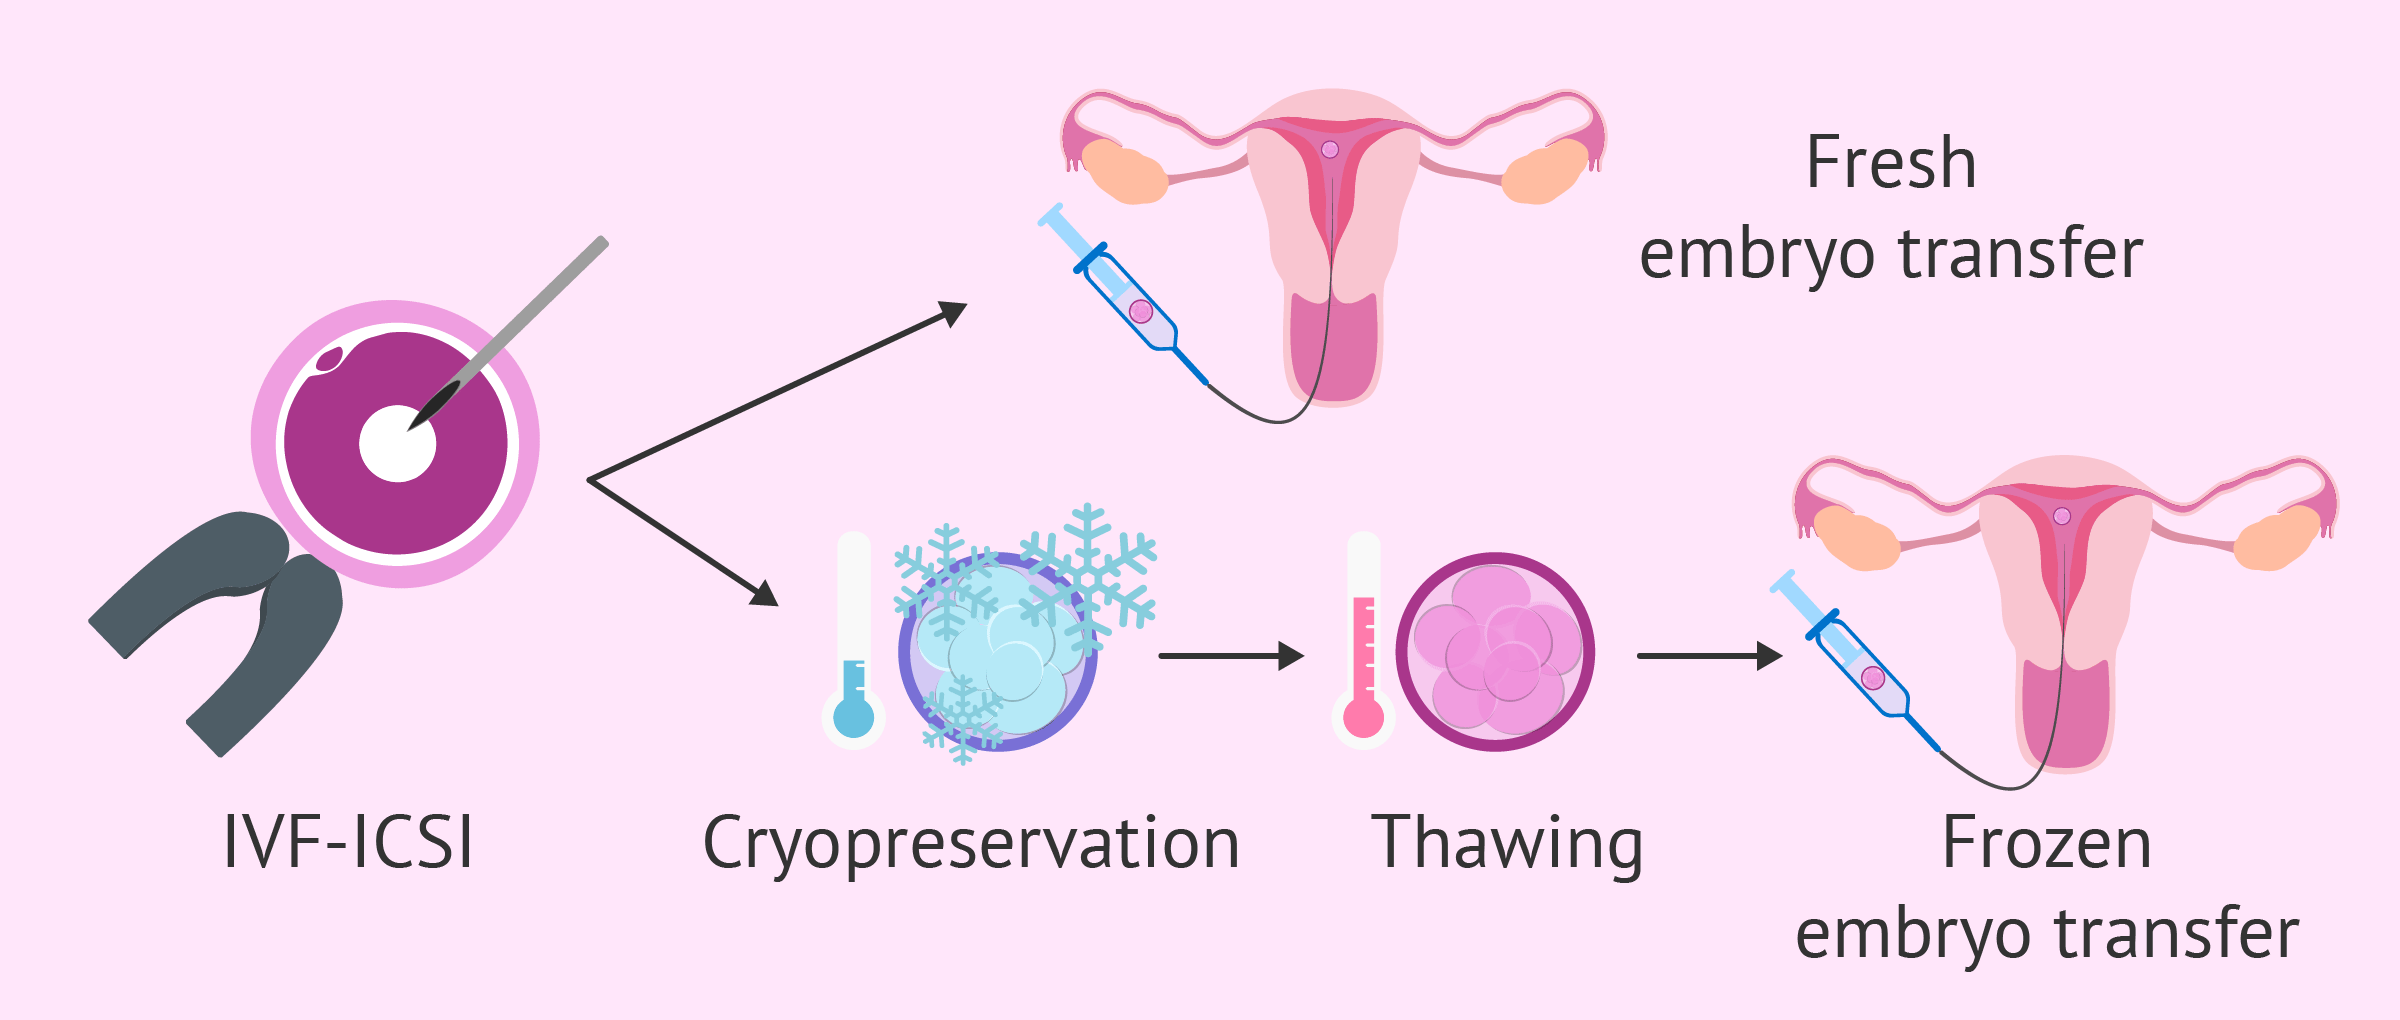 IVF with Frozen Embryo Transfer